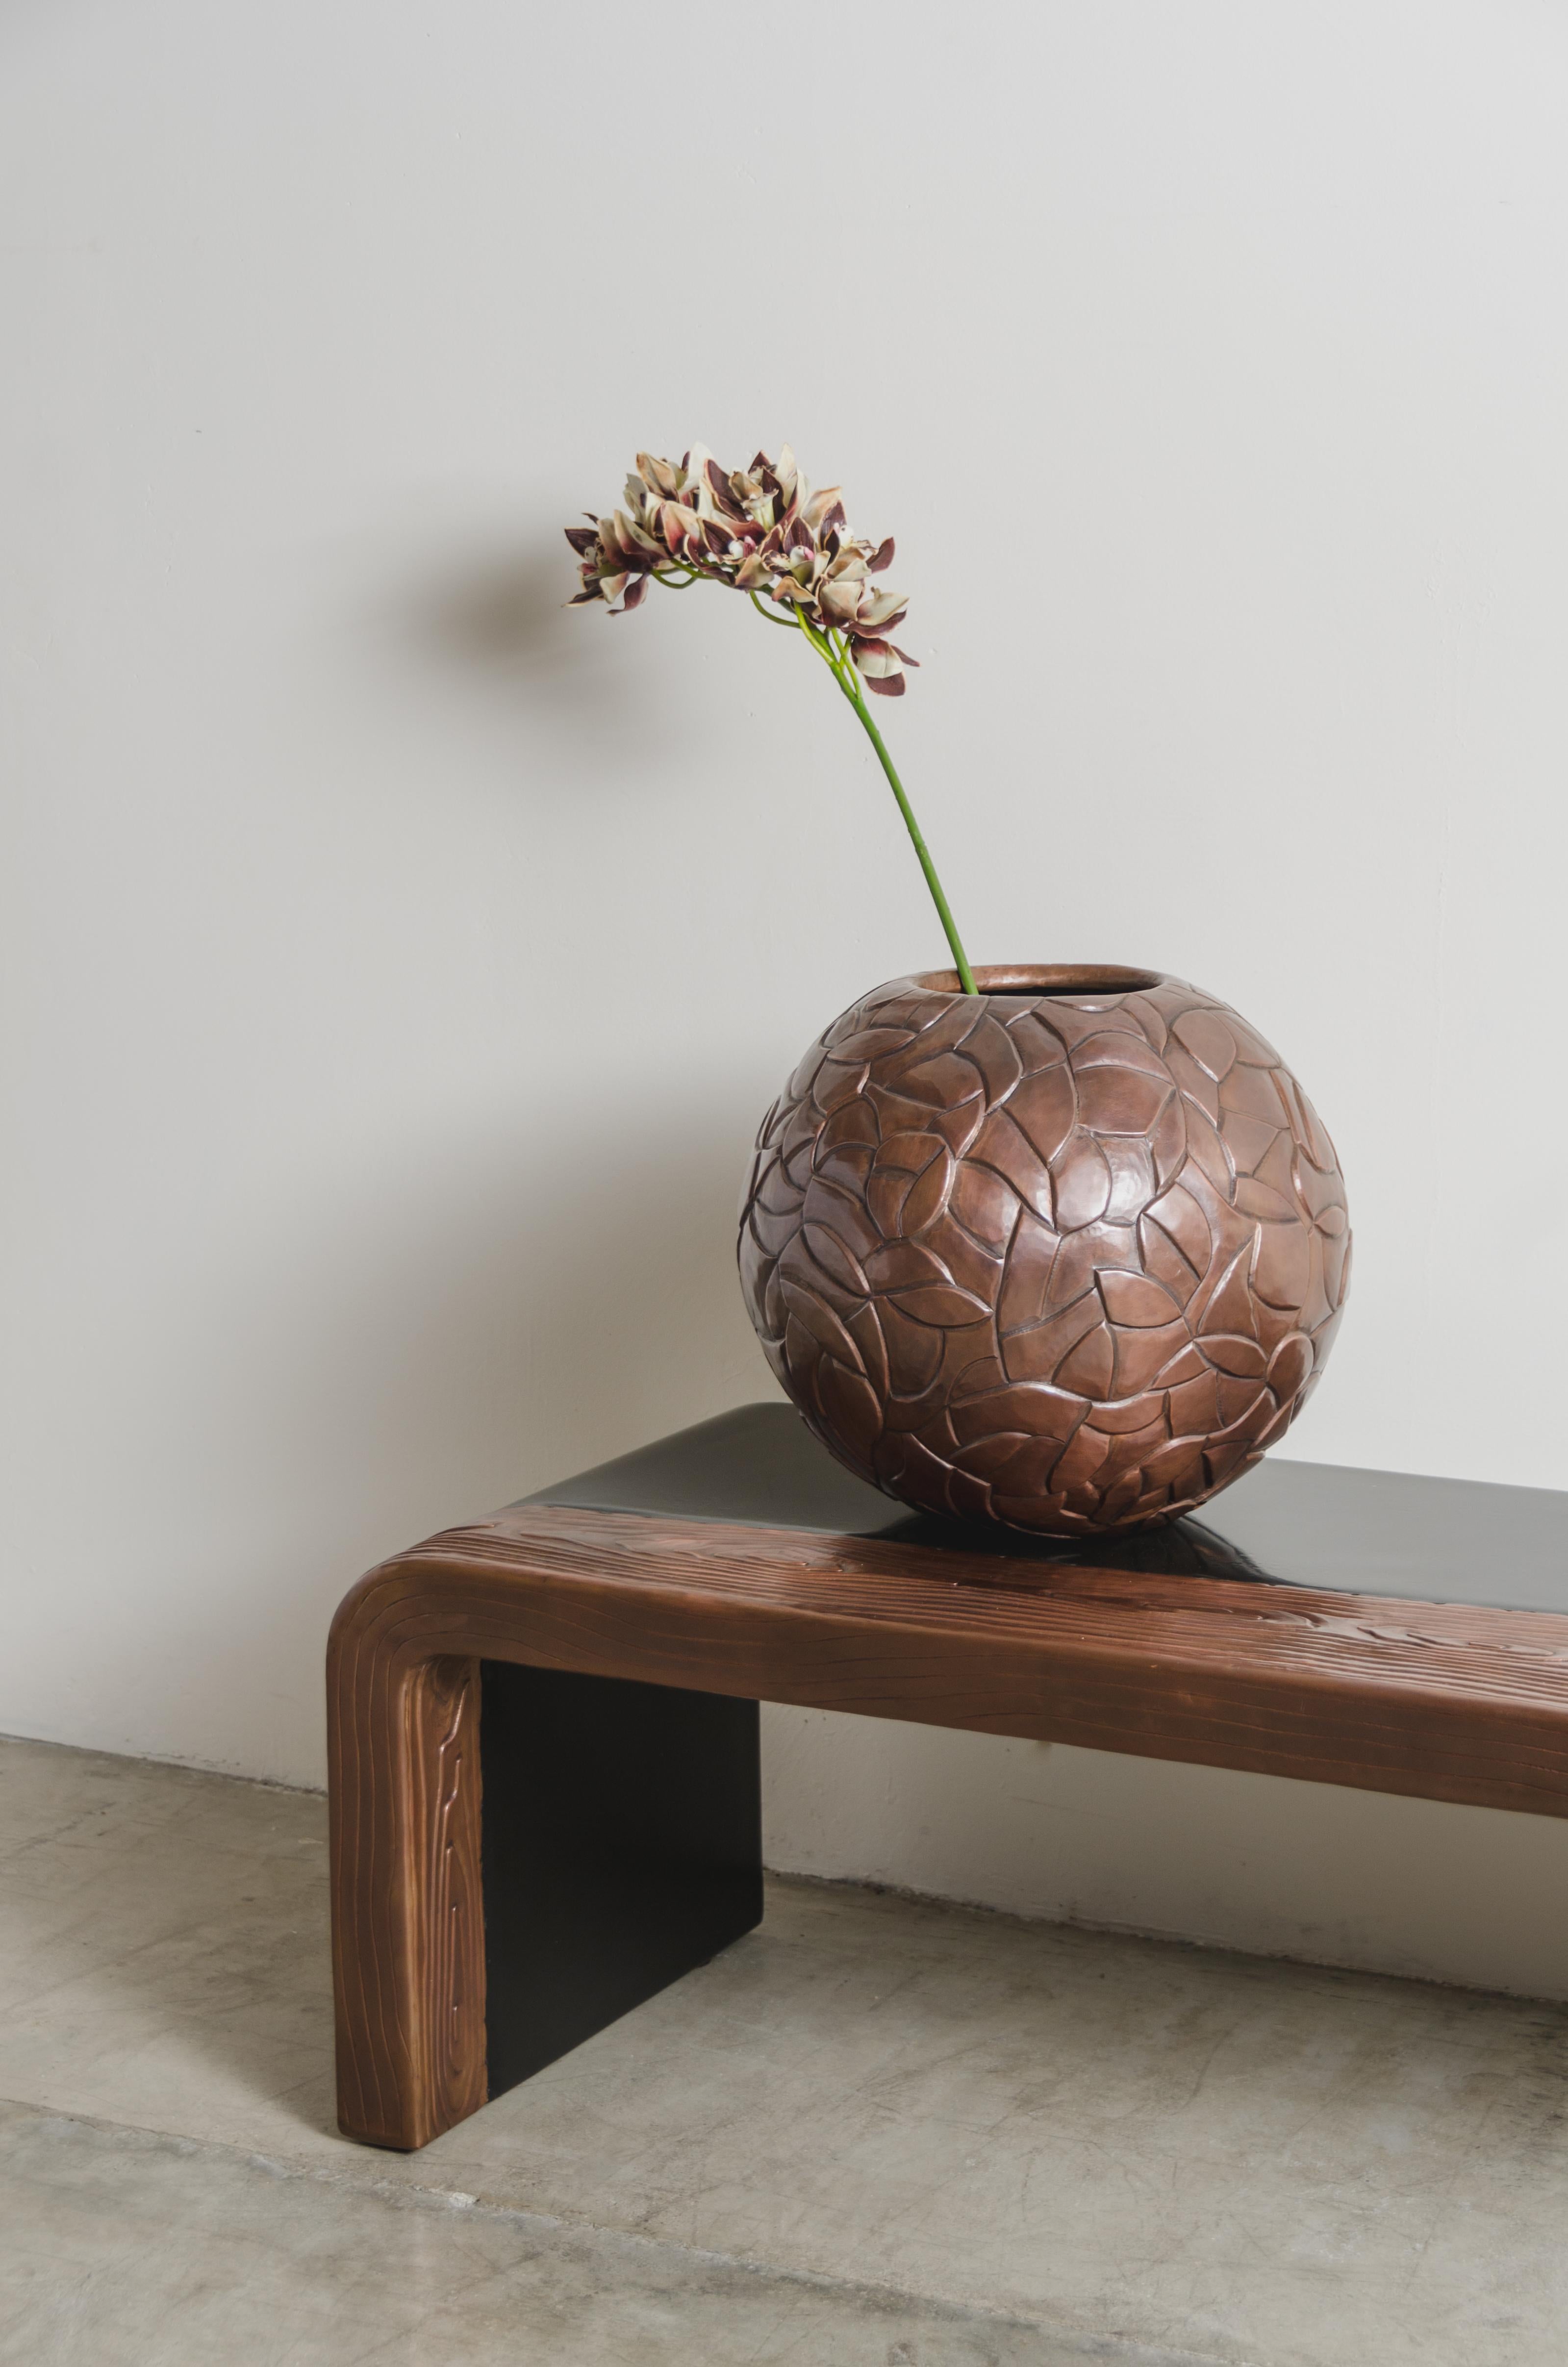 Repoussé Moon Jar w/ Chuan Design - Antique Copper by Robert Kuo, Limited Edition For Sale